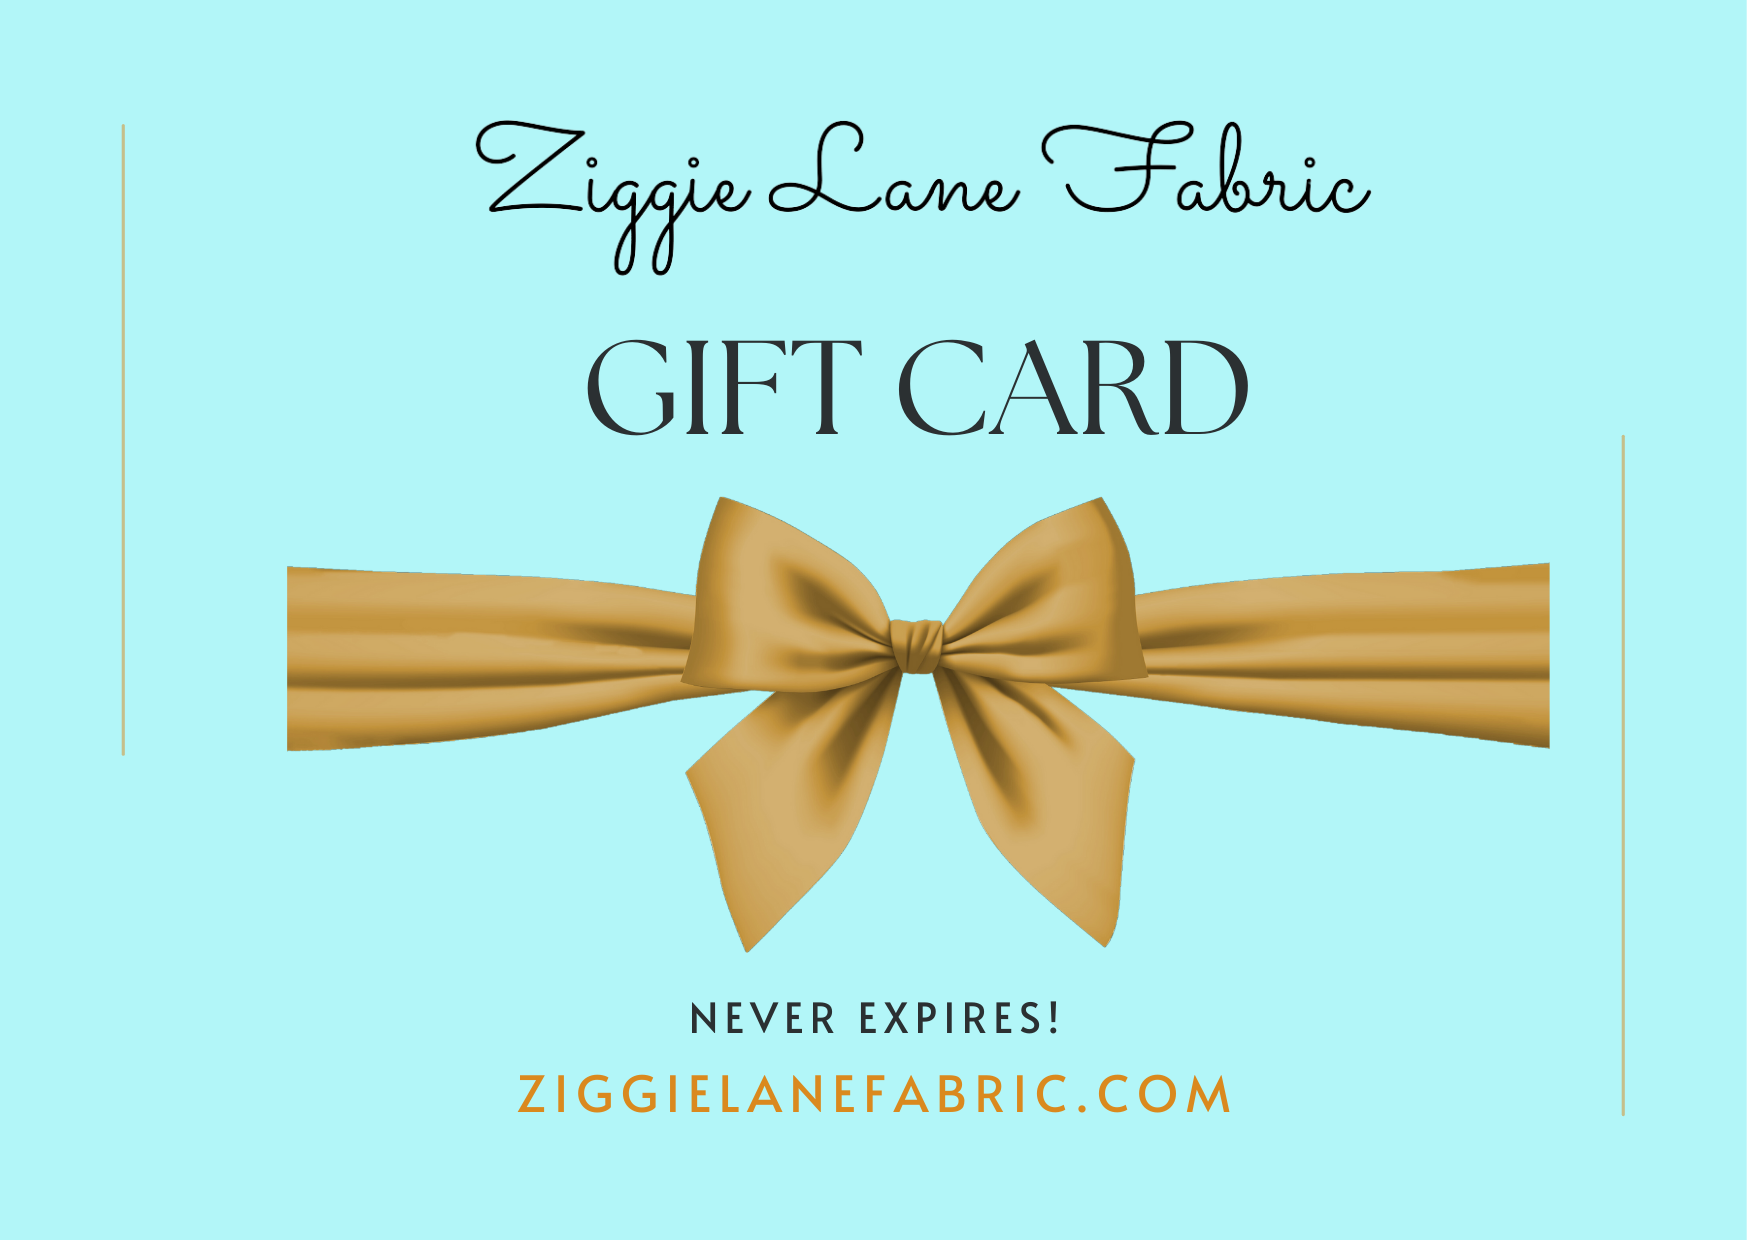 Pretty blue gift card that says Ziggie Land Fabric Gift Card Never Expires with gold bow